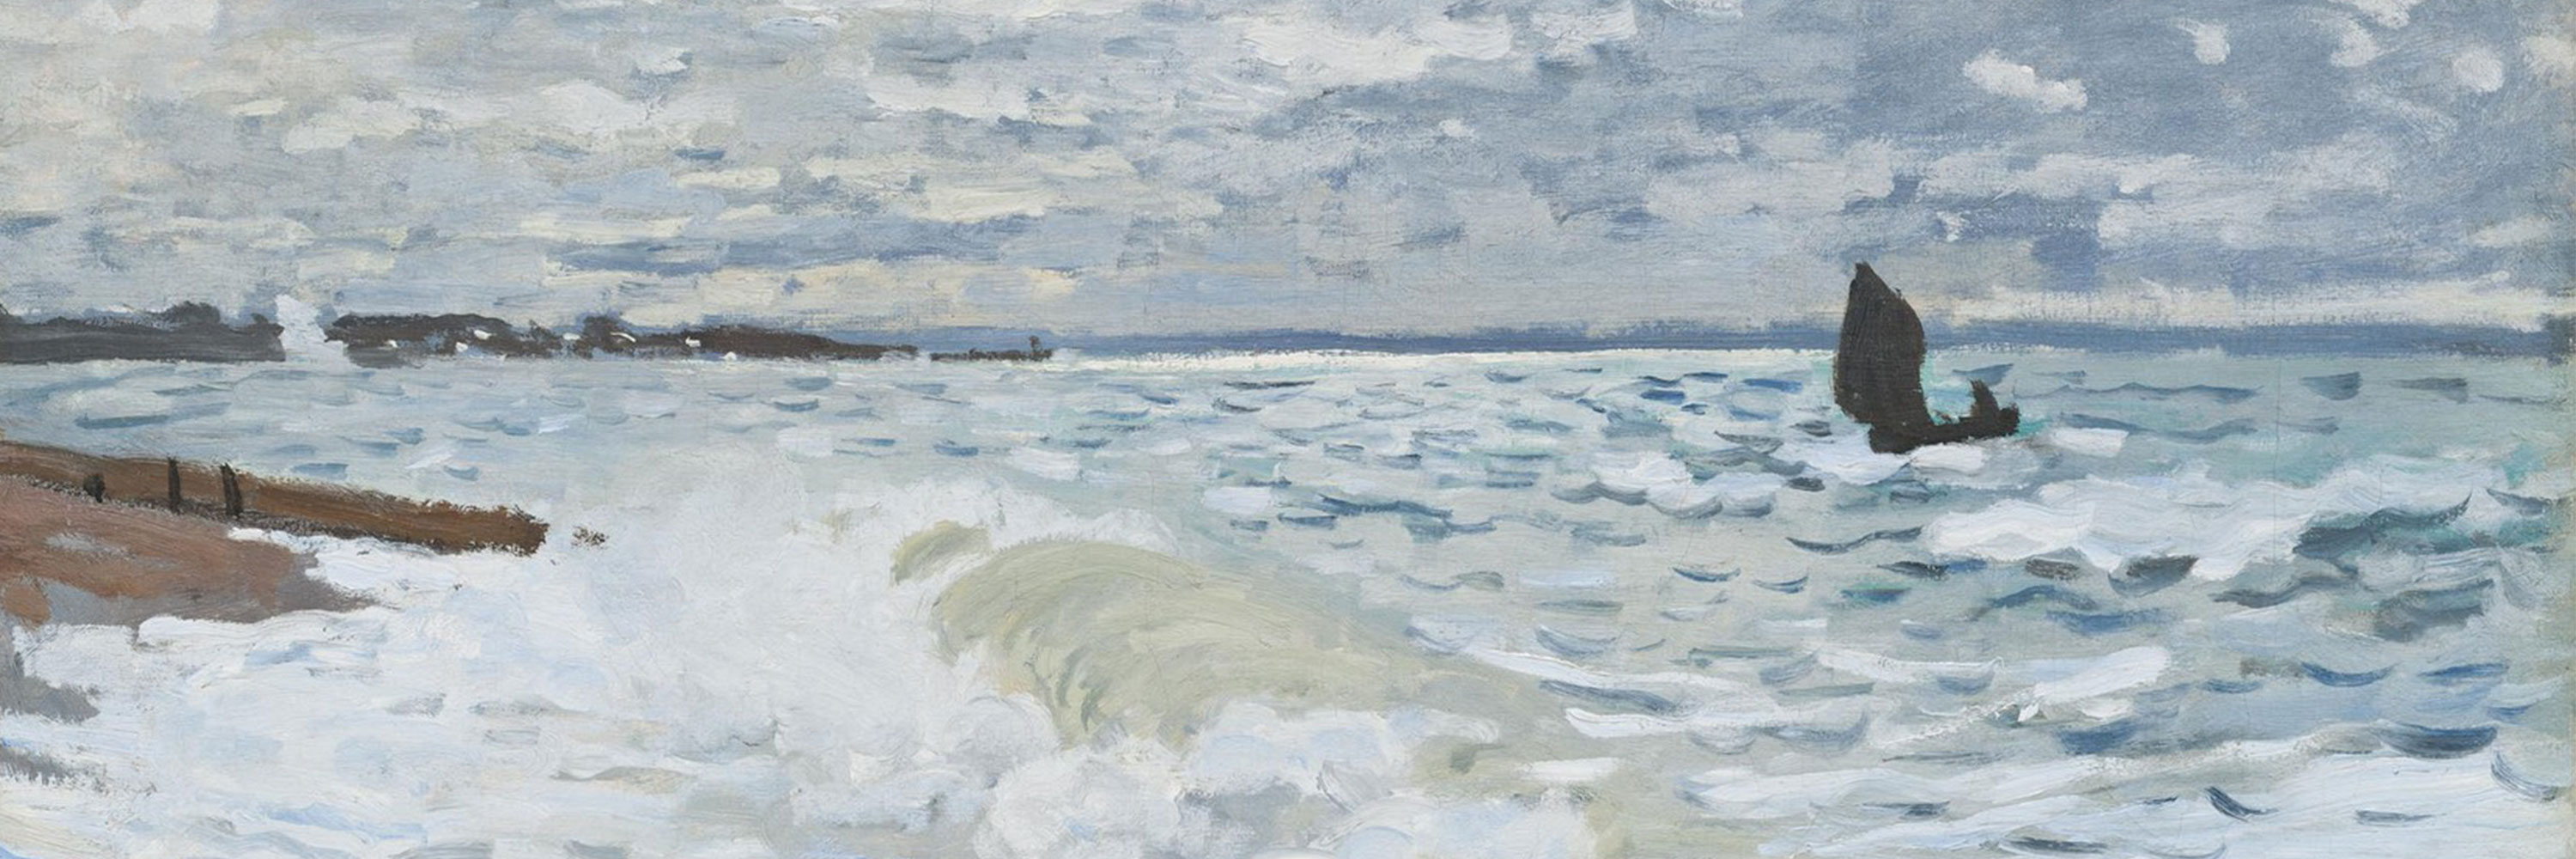 An impressionistic painting depicts a cloudy sky and rolling waves crashing on a beach. A dark sailboat rides the waves in the distance.